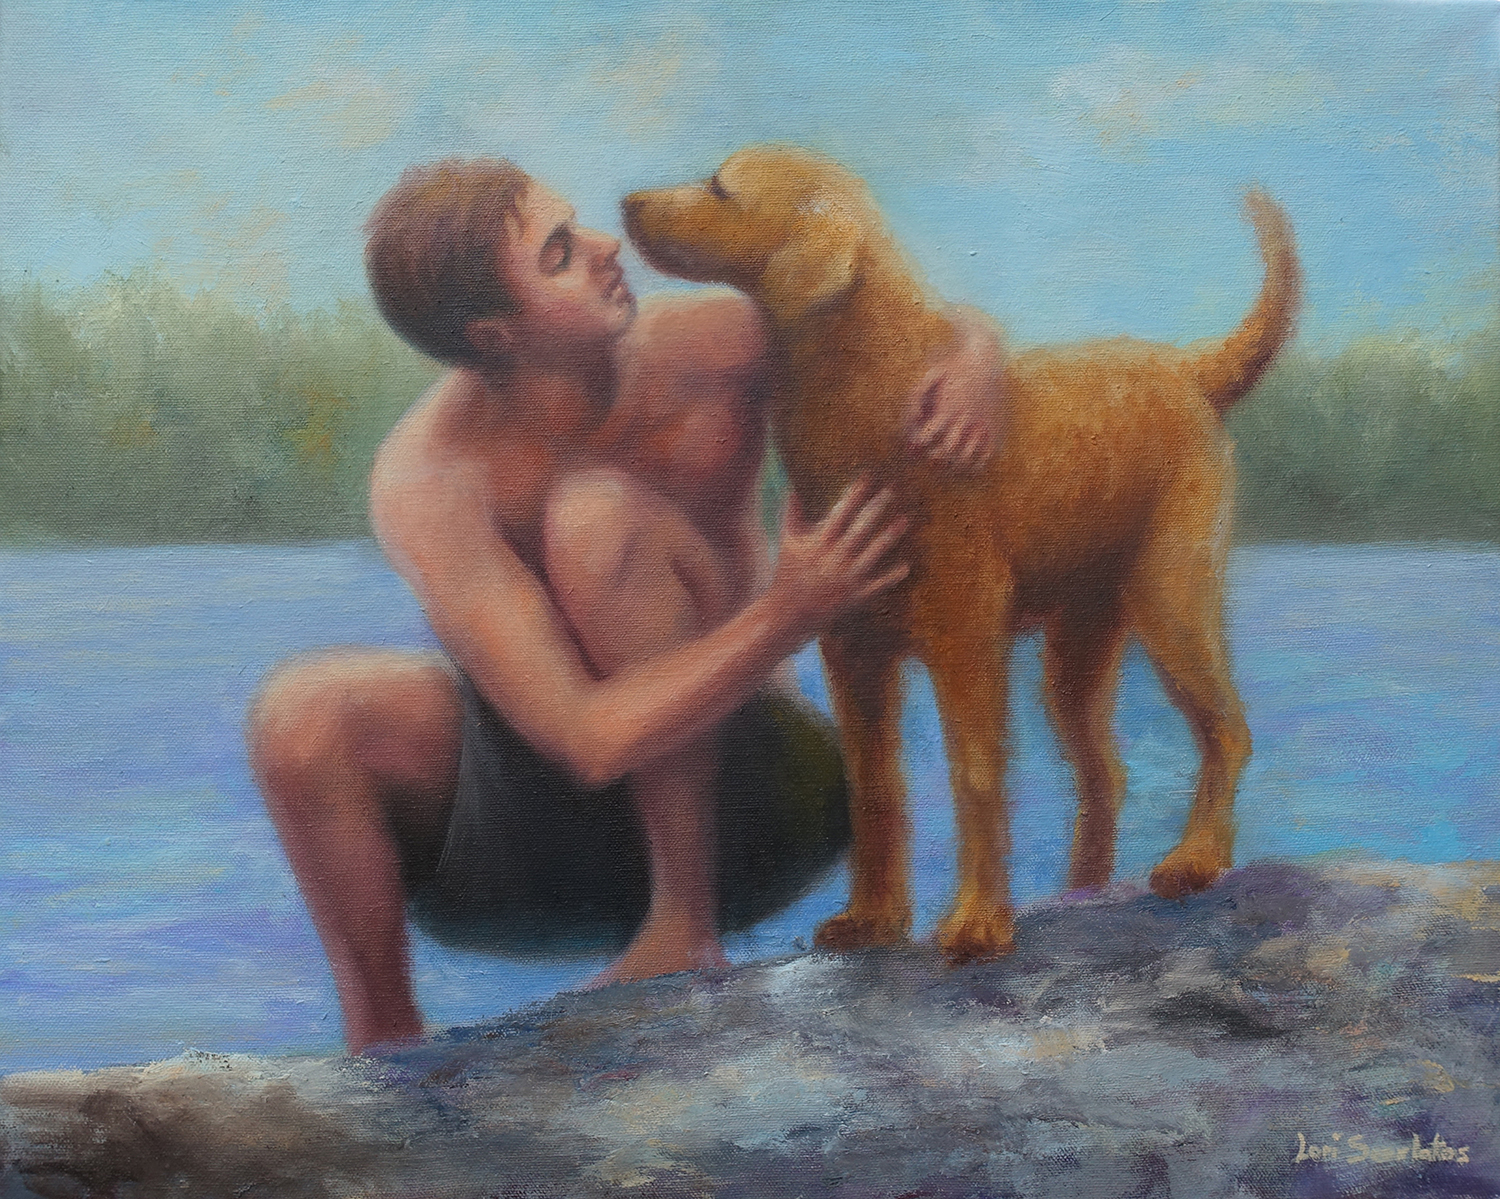 The first year that we brought Taffy to Maine, Alex coaxed her out into the pond and up onto Mermaid Rock. It’s not an easy climb: steep and slippery in spots. But they made it. That moment of victory, to me, seemed the perfect subject for a painting.